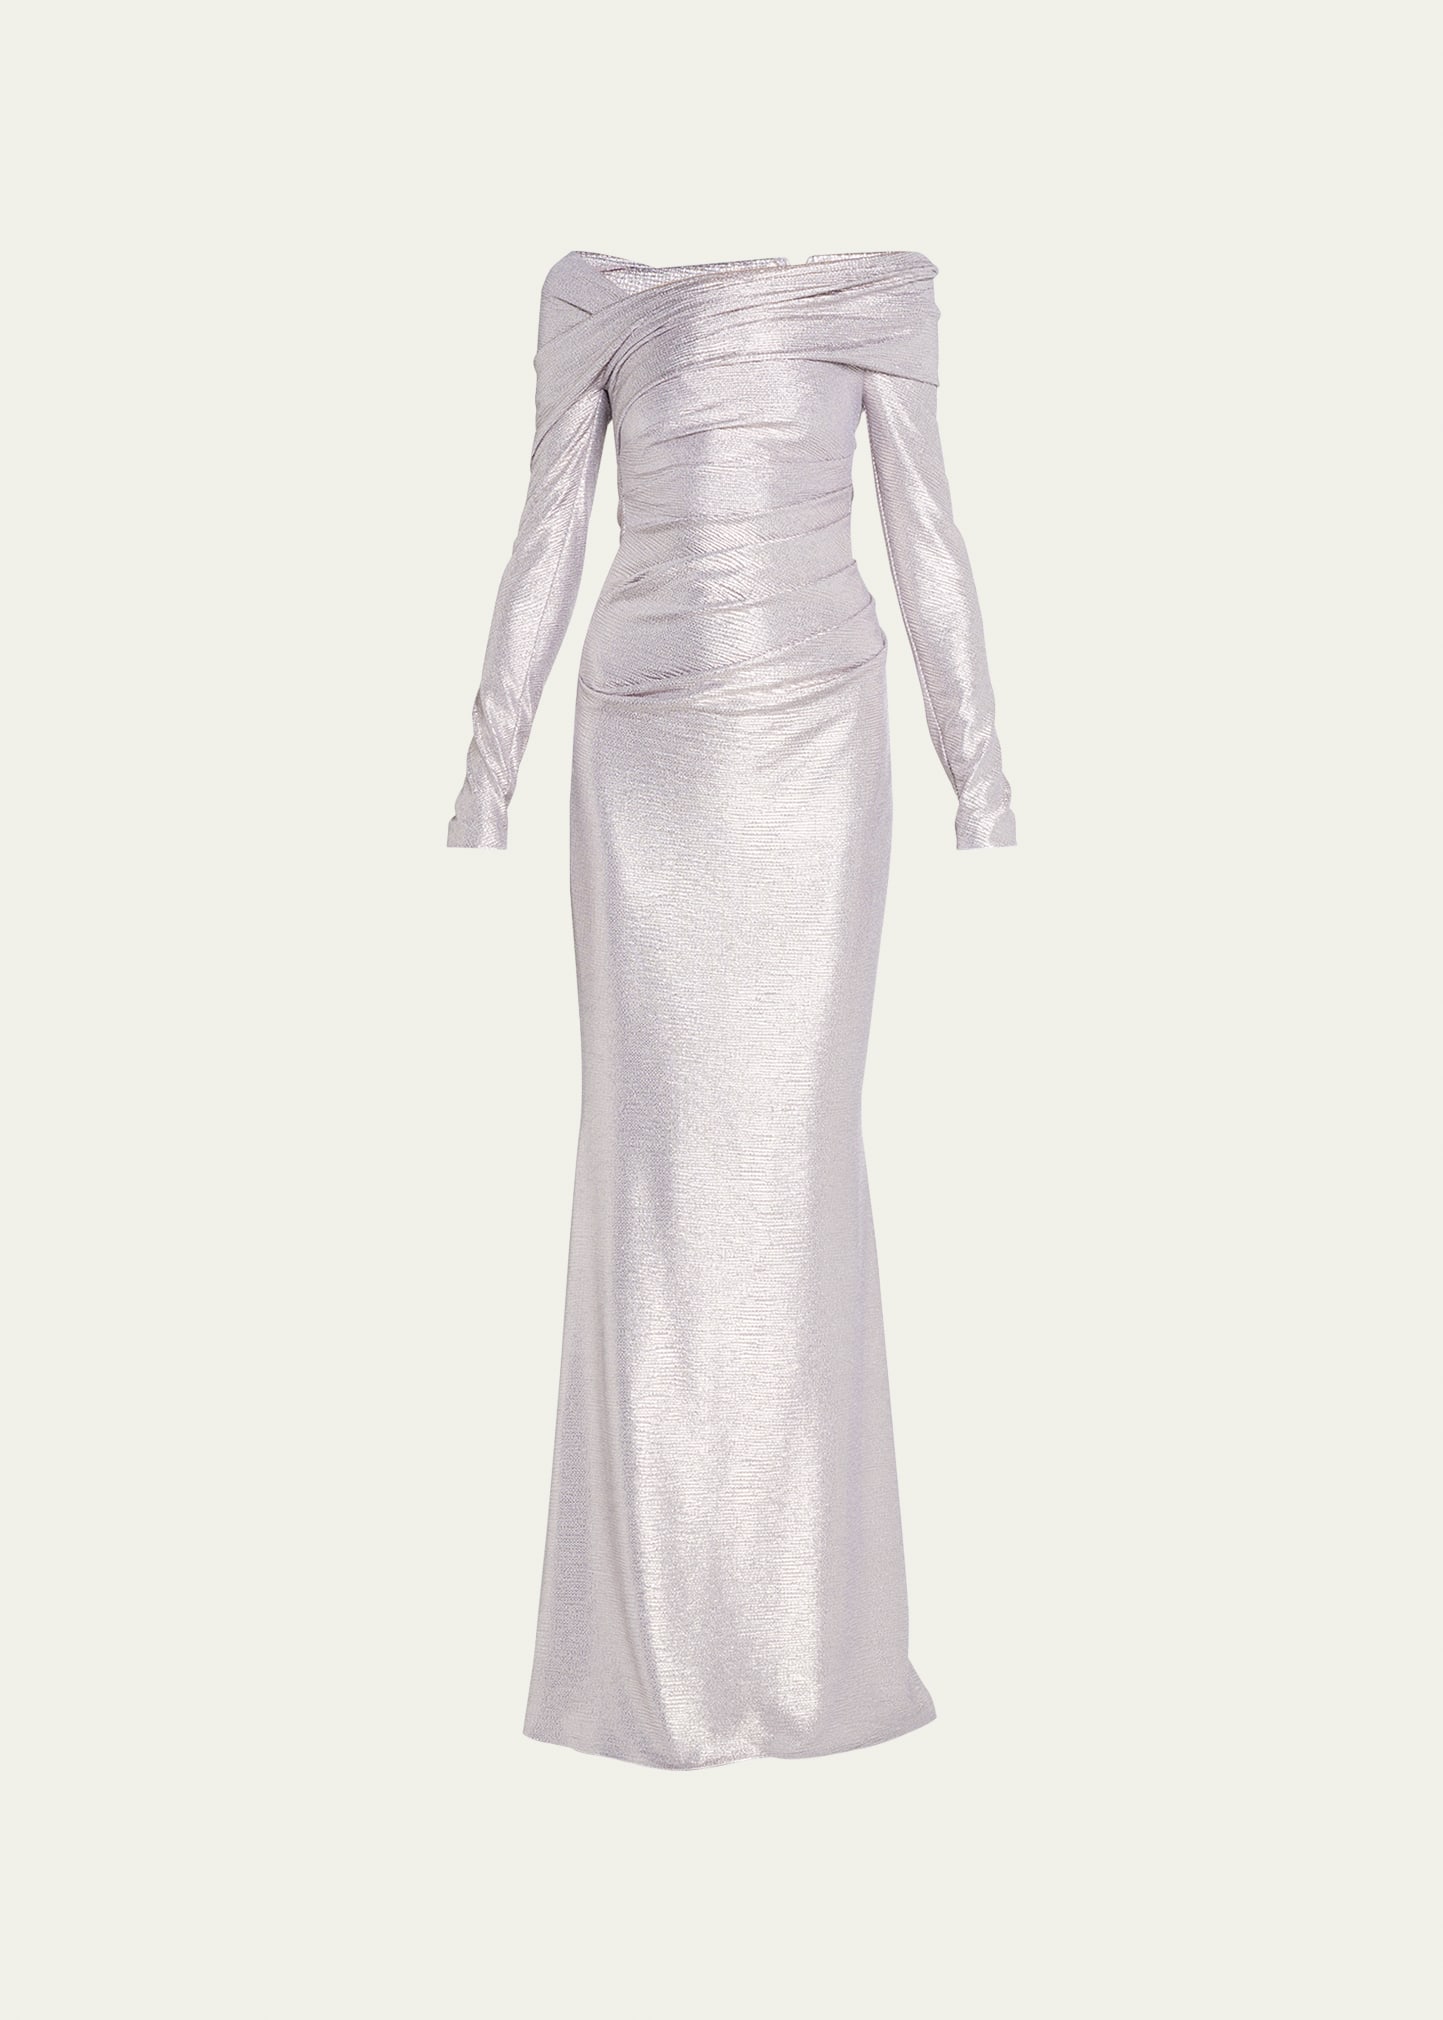 TALBOT RUNHOF MIRRORBALL STRETCH OFF-THE-SHOULDER DRAPED GOWN